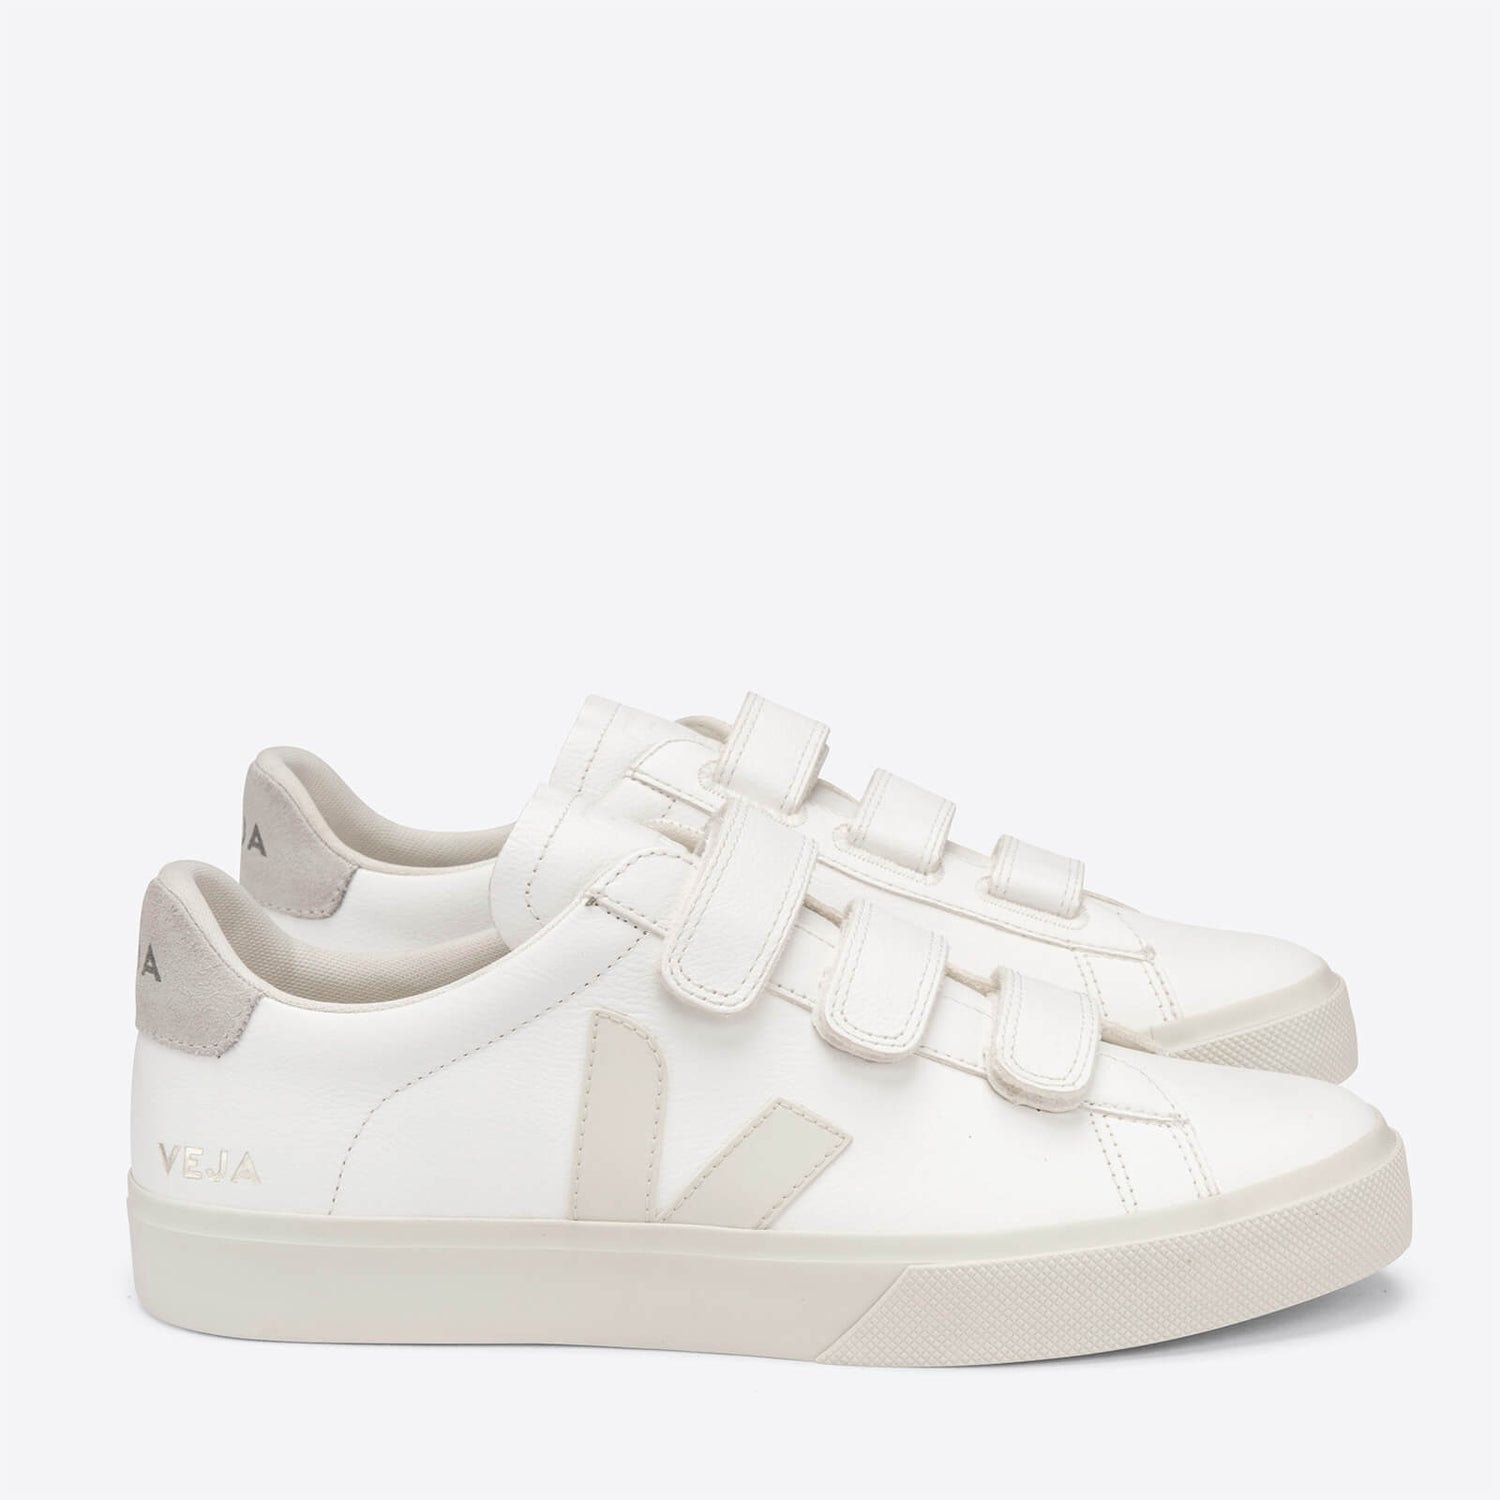 Veja Women's Recife Chrome Free Leather Velcro Trainers - Extra White/Pierre/Natural